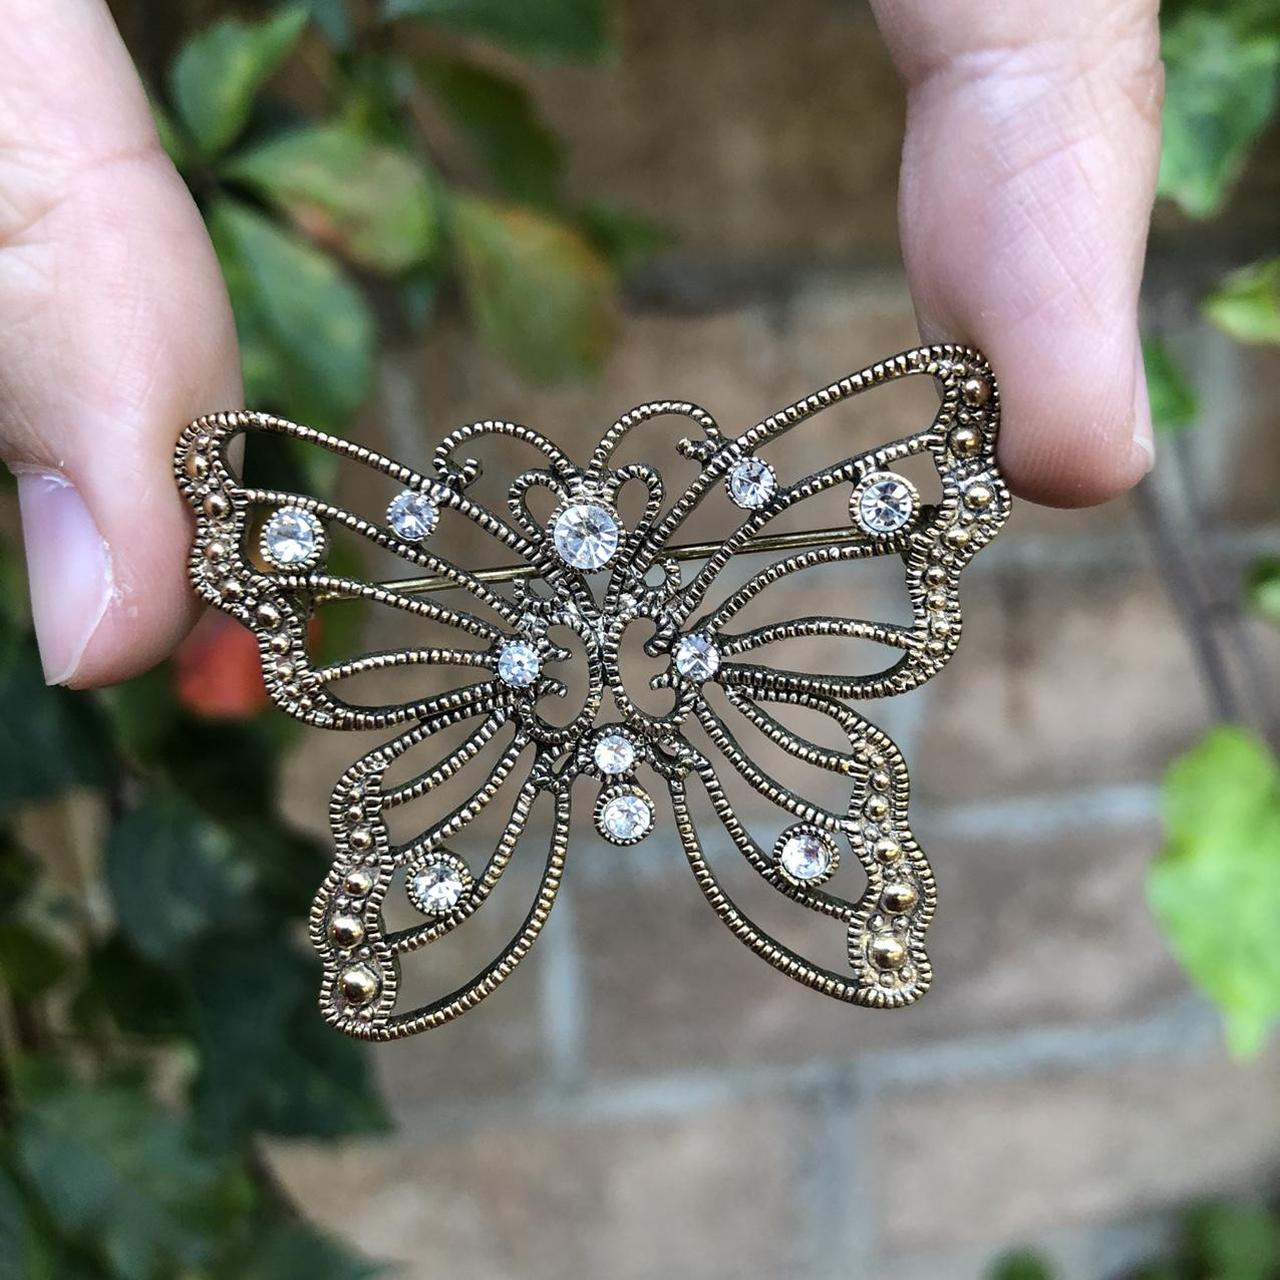 2 Vintage Butterfly Pins with Rhinestones Red - Depop